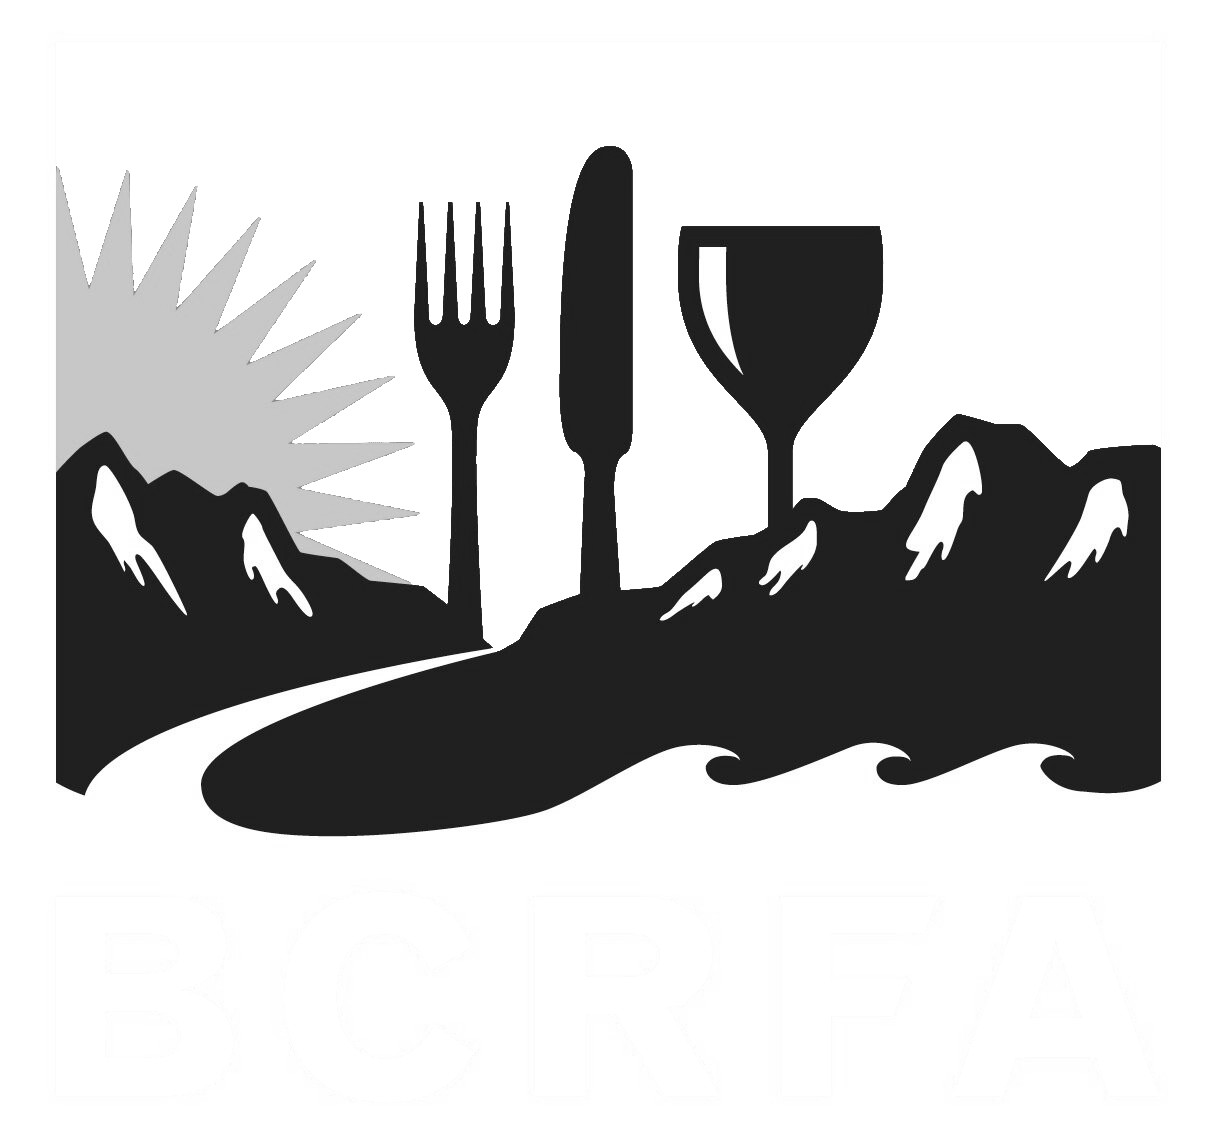 Member of BC Restaurant and Food Services Association